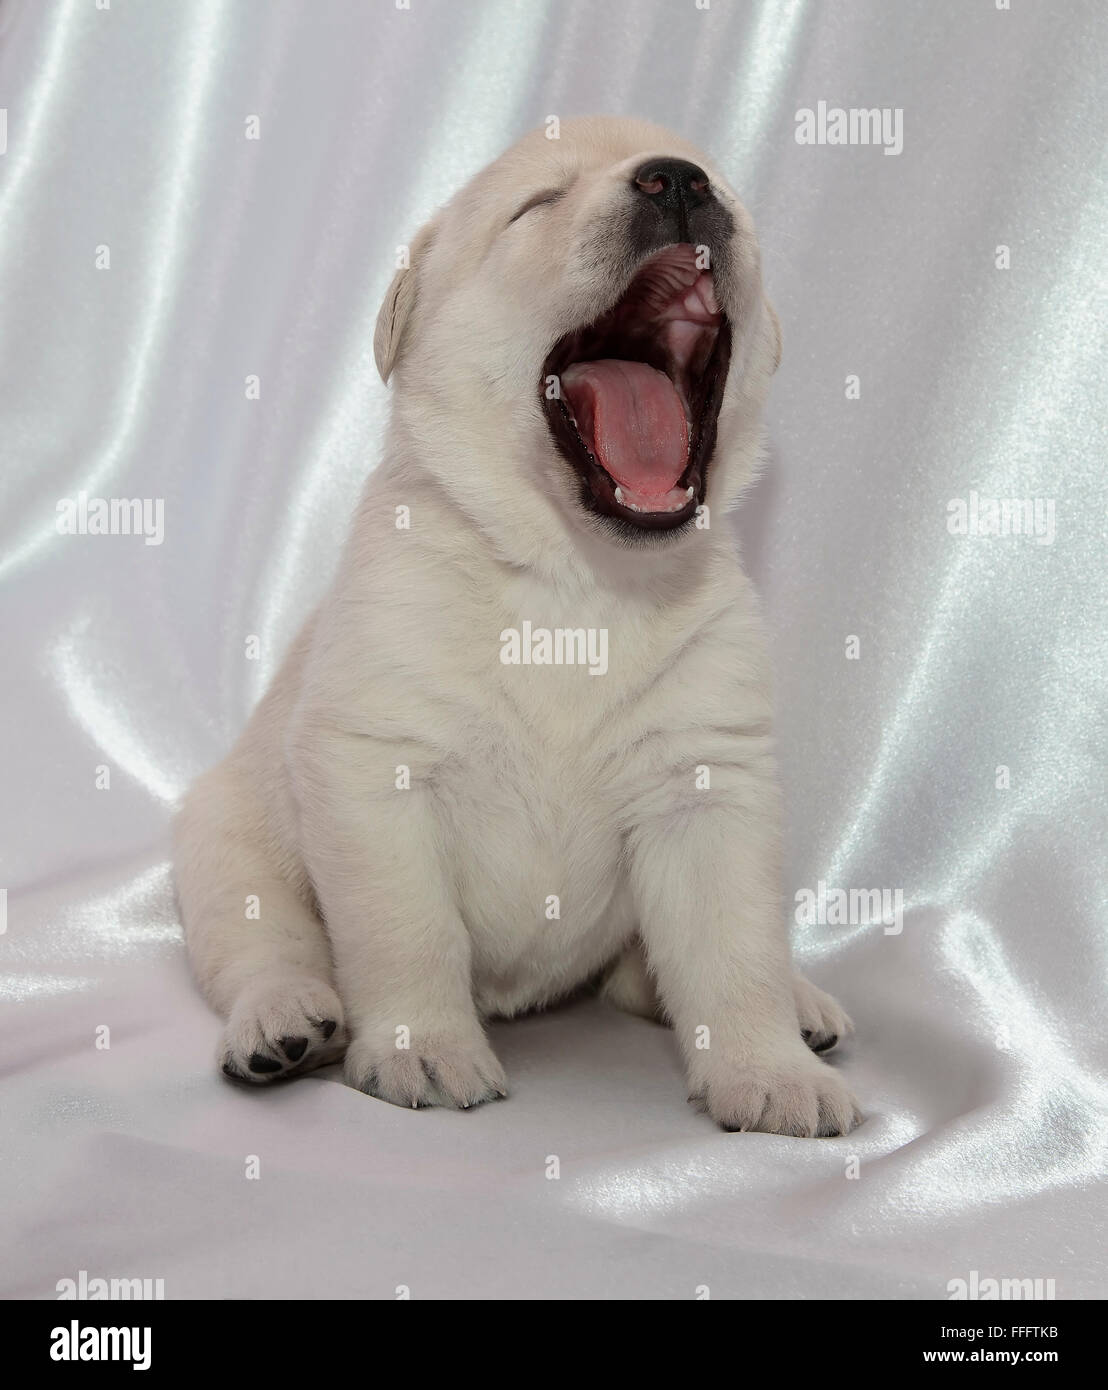 Labrador retriever puppy. Sitting, yawning, front view. Stock Photo